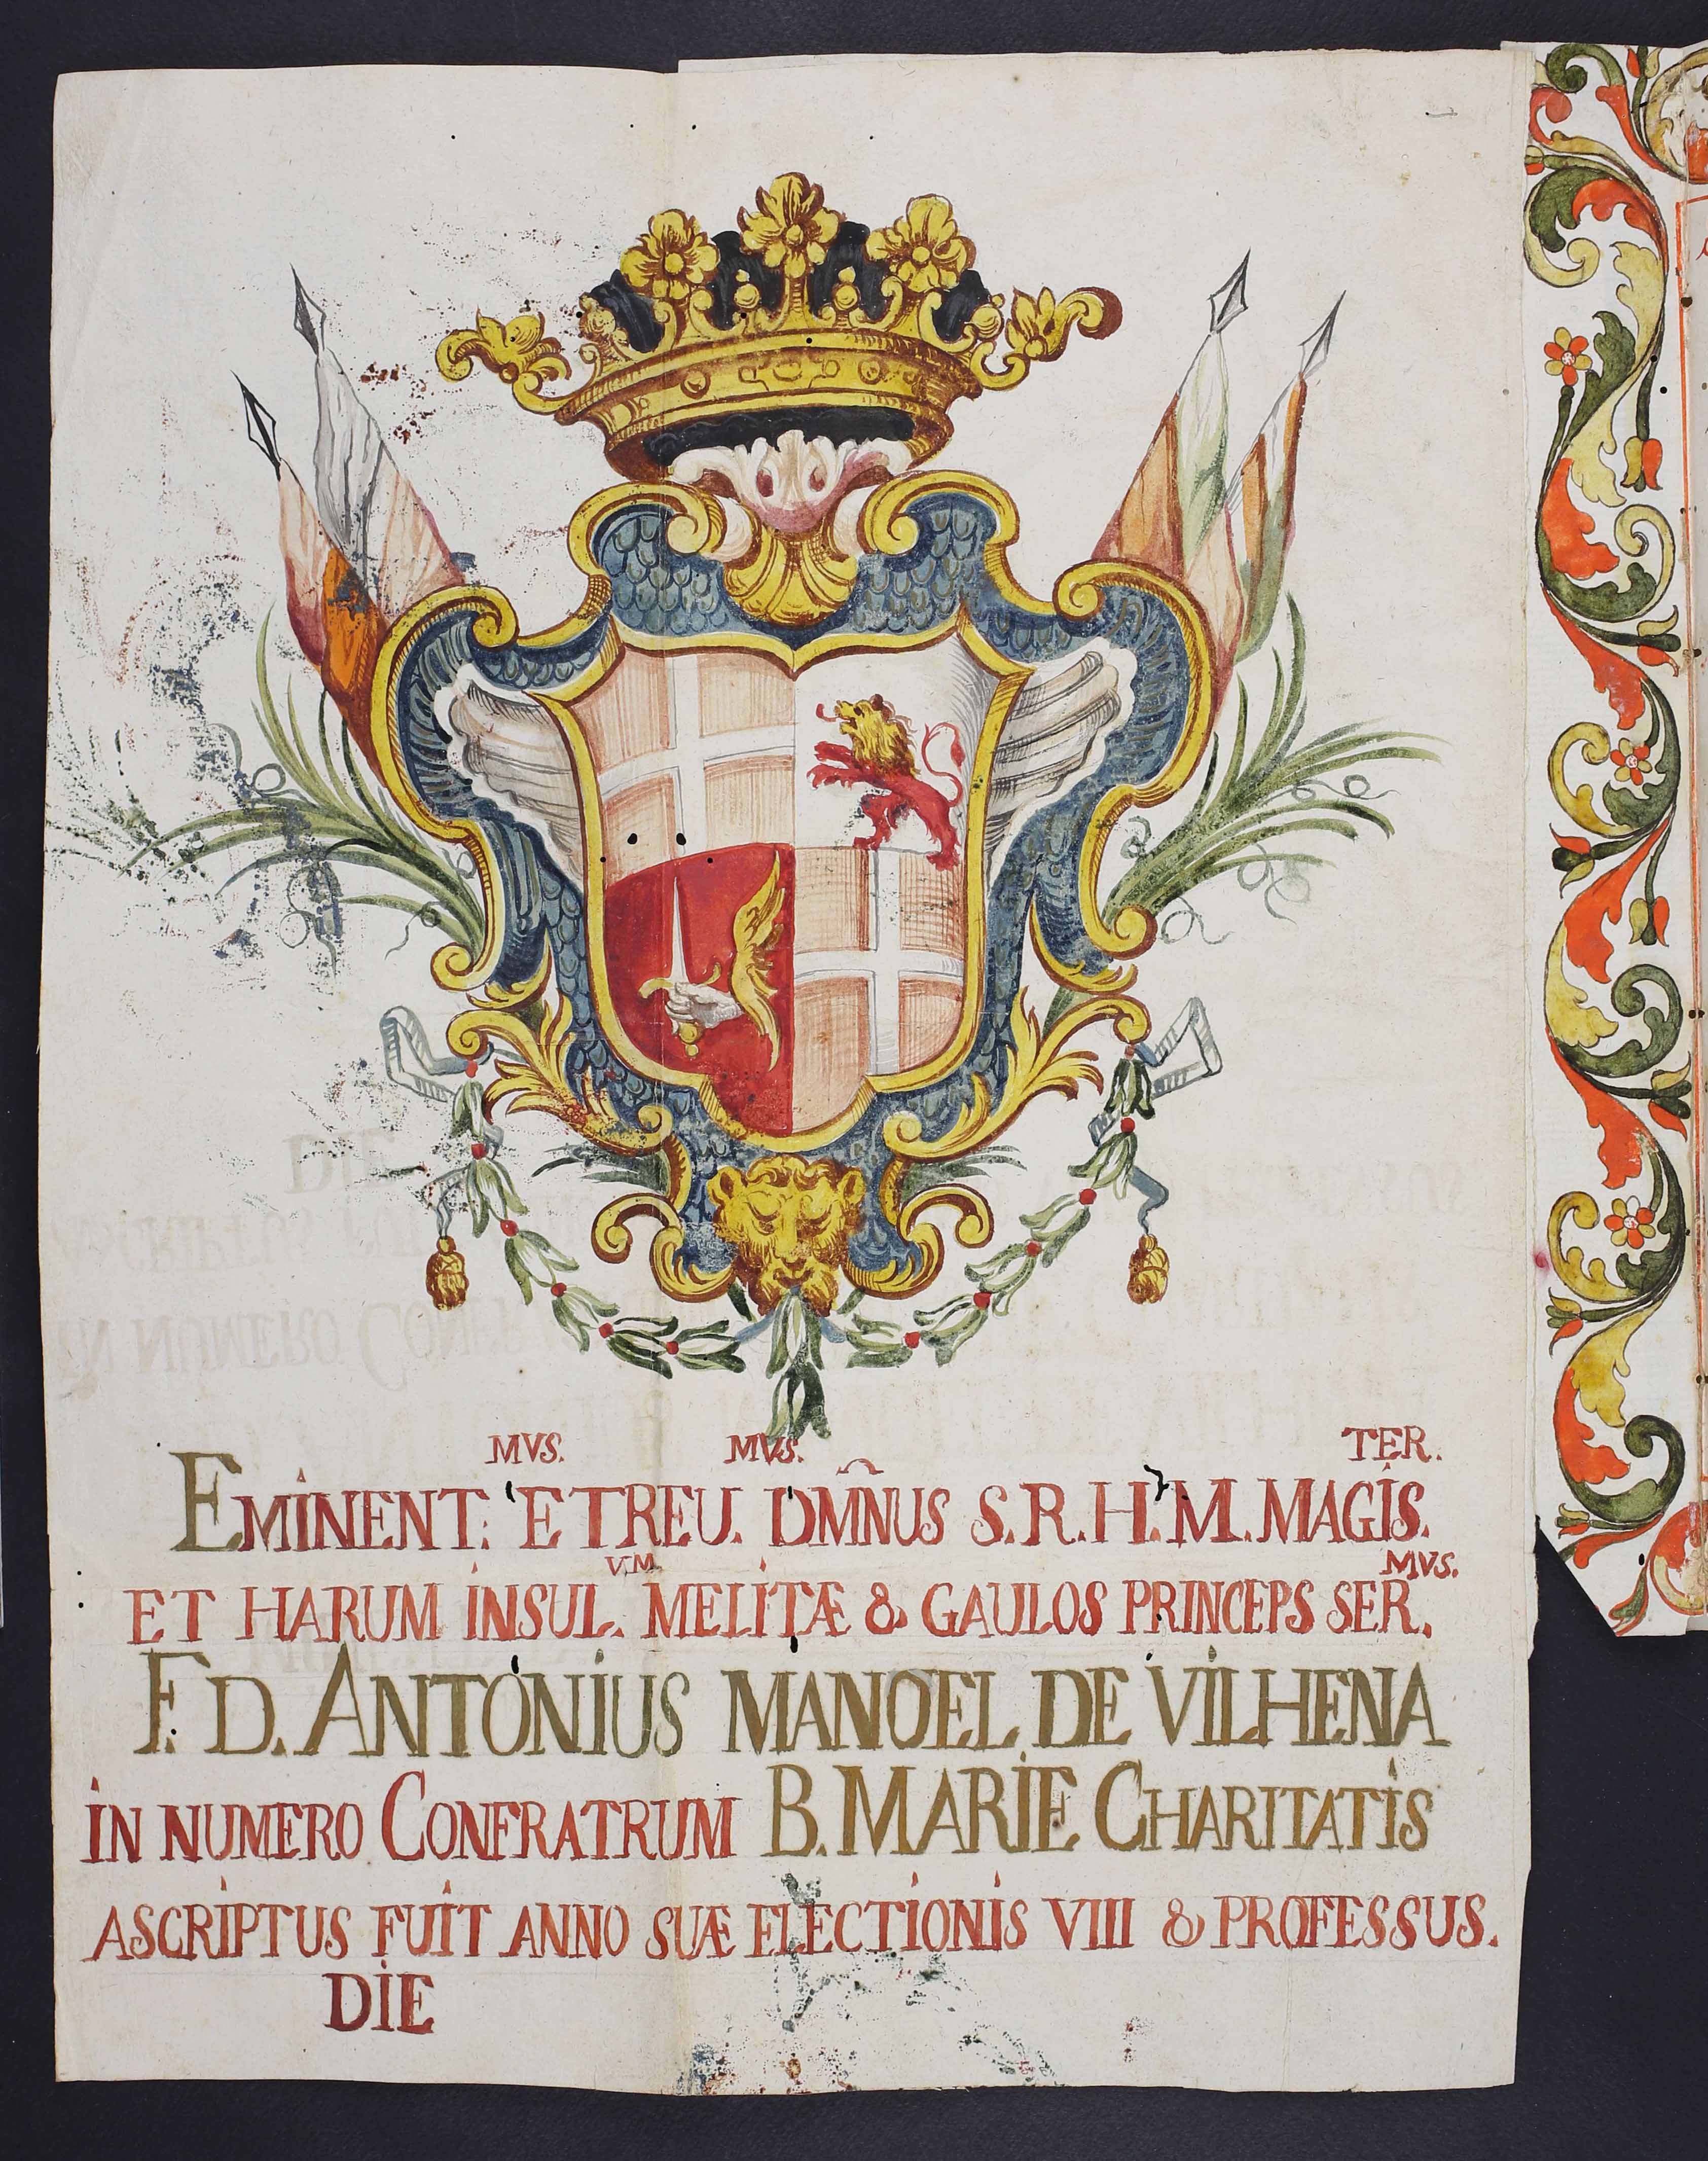 Coat of Arms of Grand Master Vilhena, Confraternity of Charity (<a href='https://w3id.org/vhmml/readingRoom/view/222148'>KKM 00102</a>)